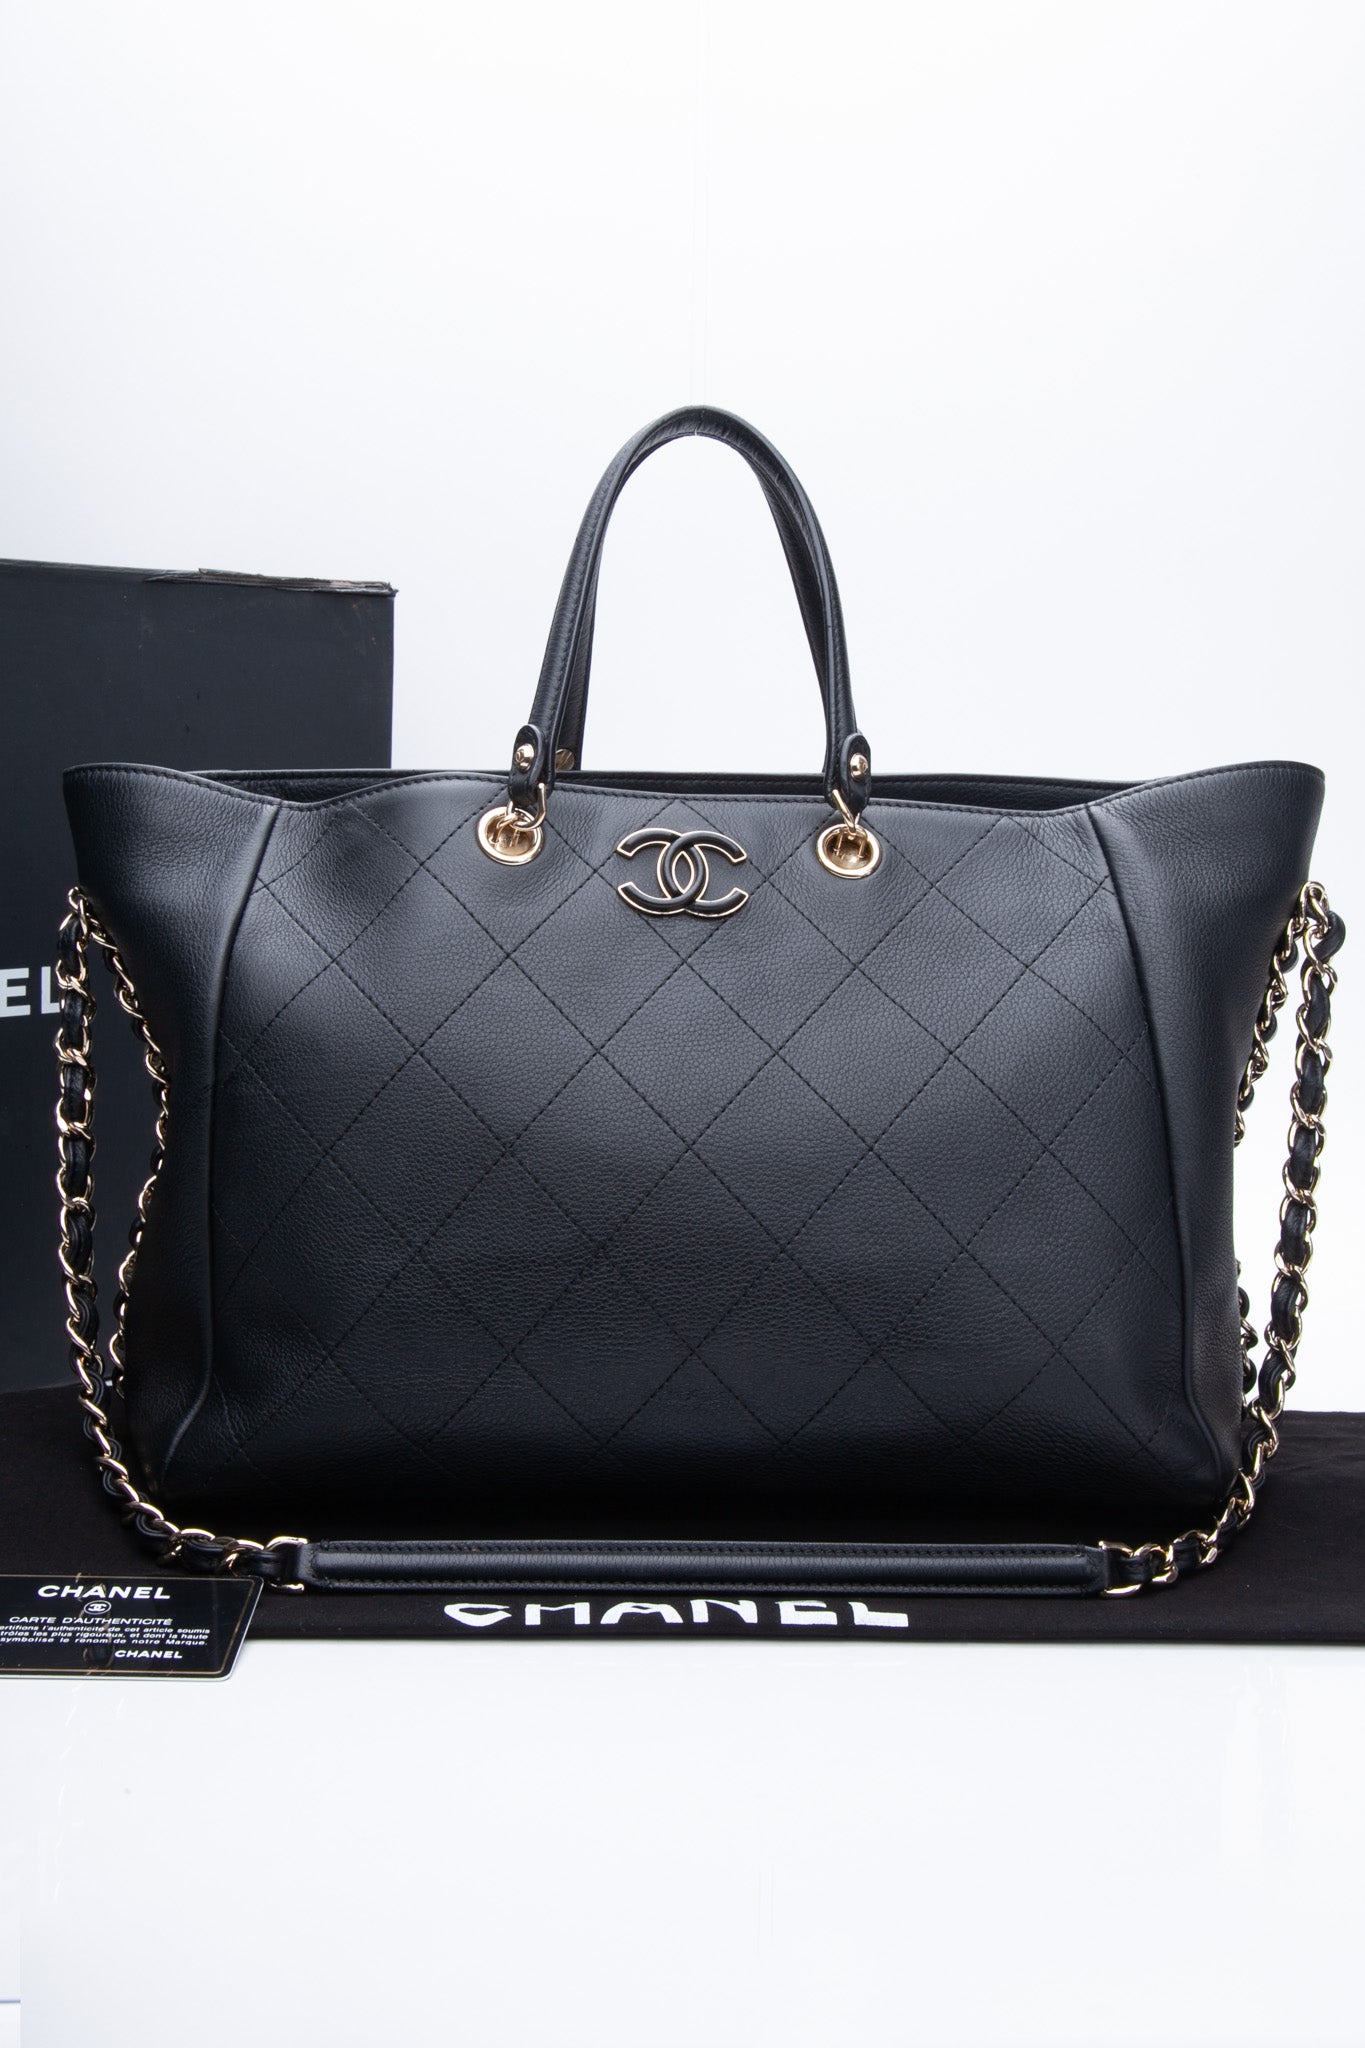 CHANEL Calfskin Stitched Shopping Tote Black 1302102